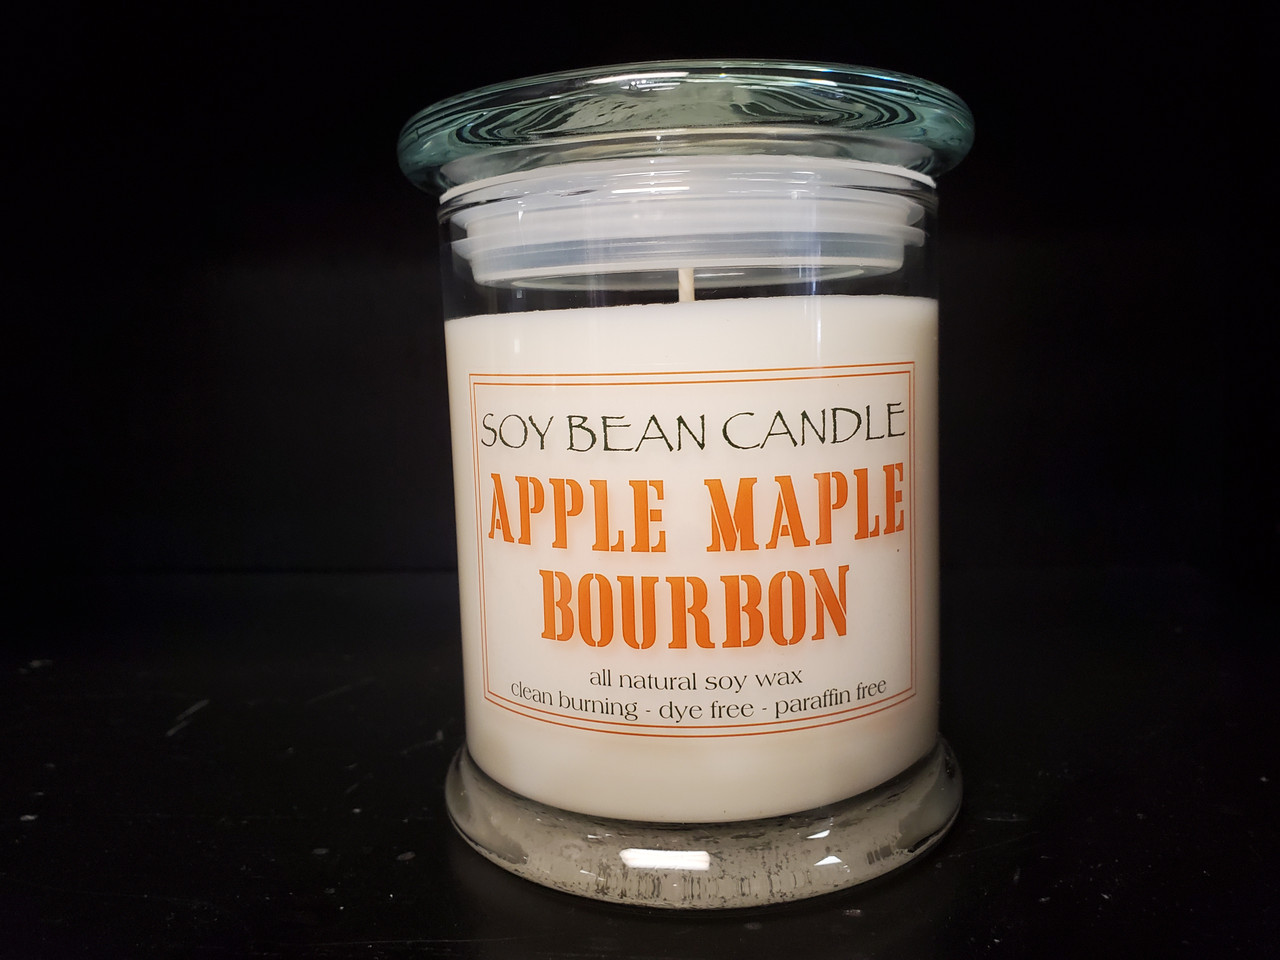 Maple Bourbon Natural Soy Wax Candle